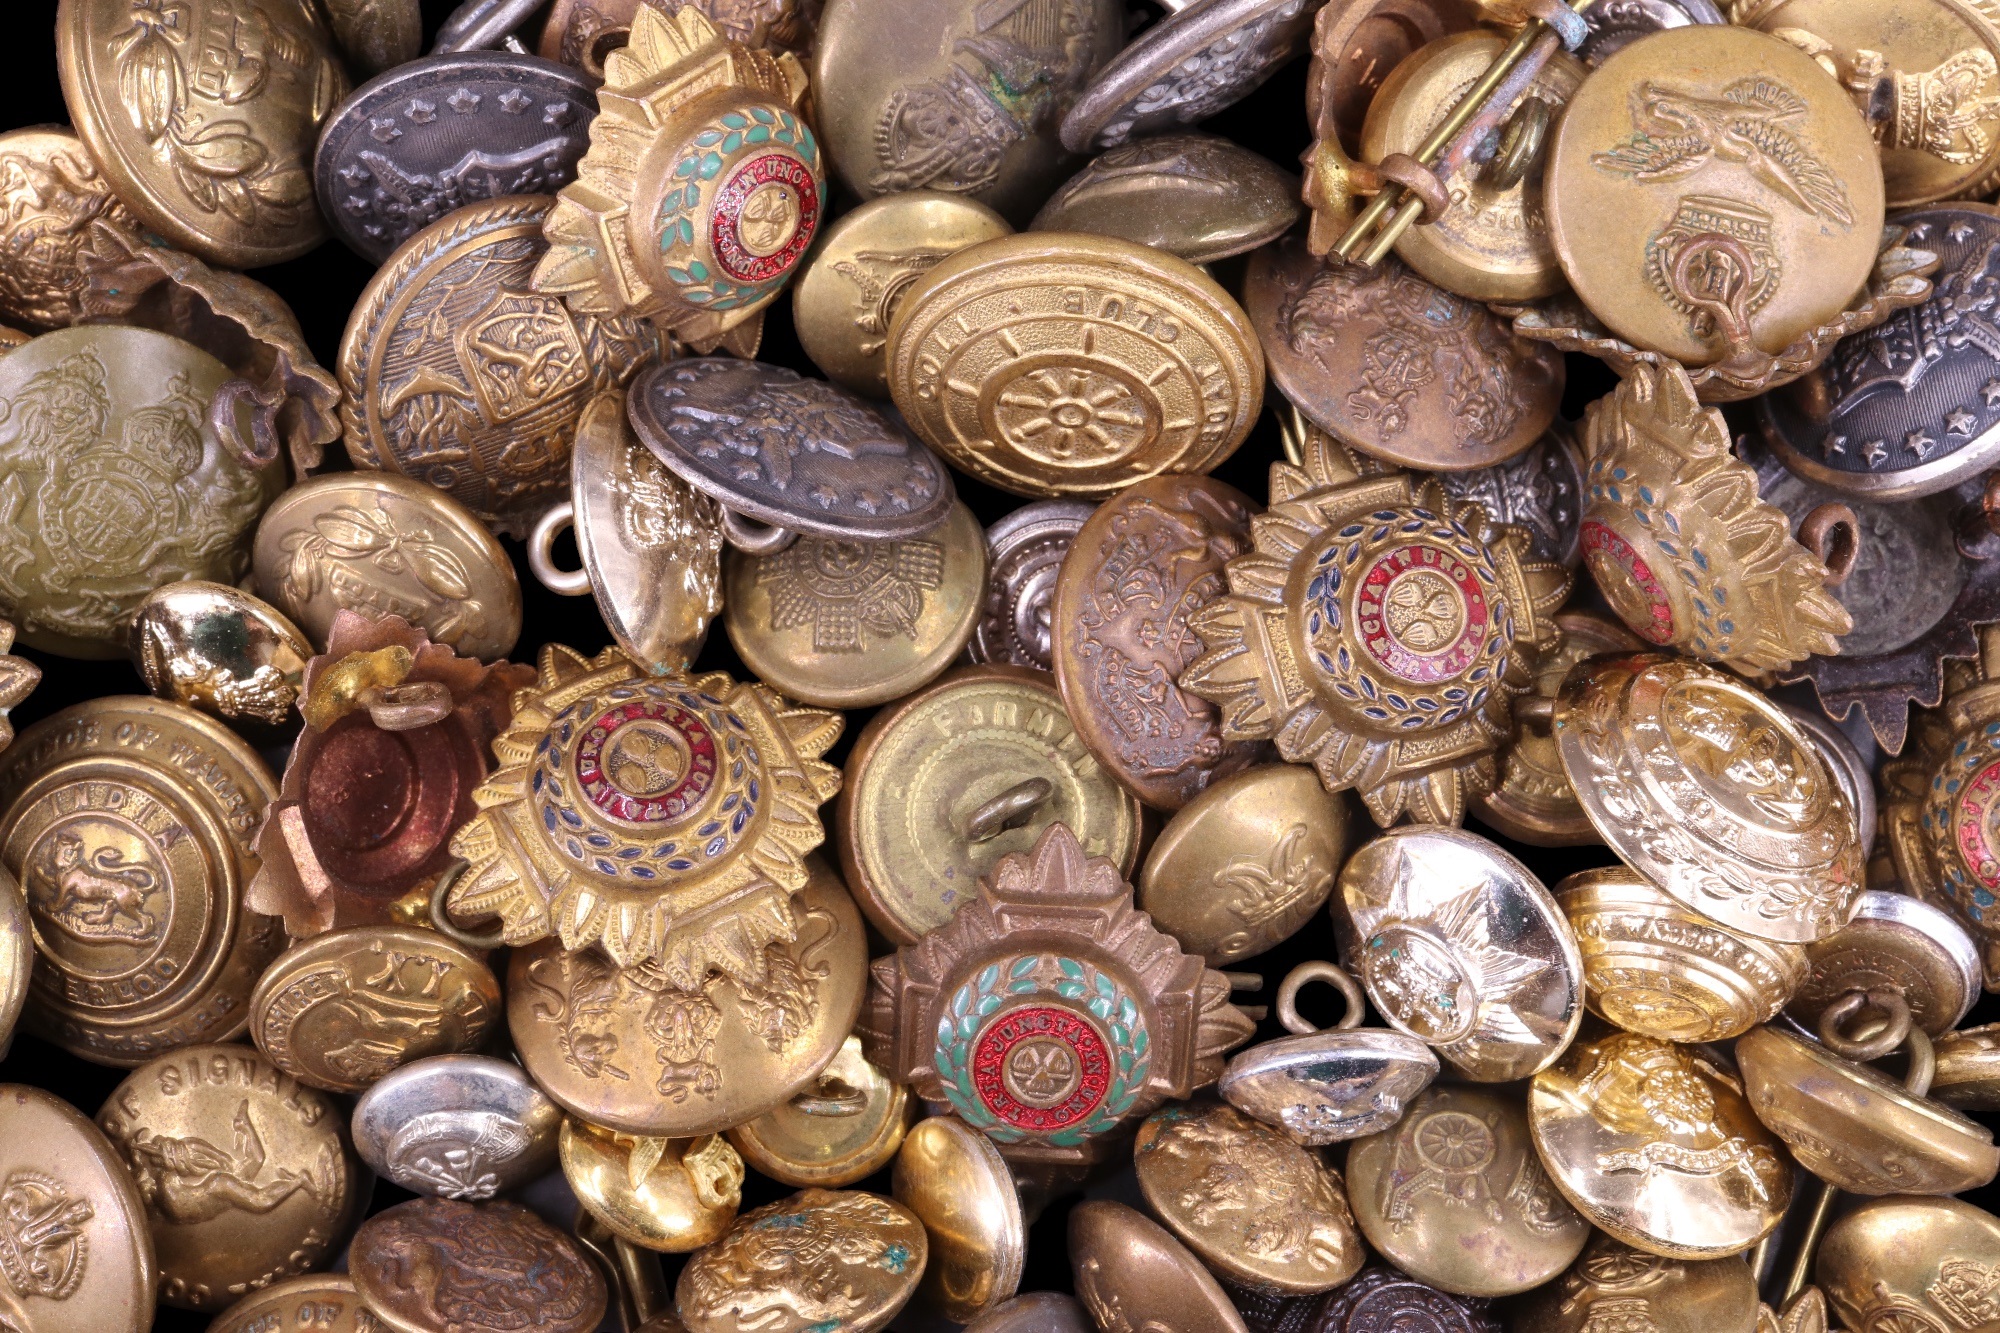 A quantity of British army buttons and rank badges etc - Image 7 of 7